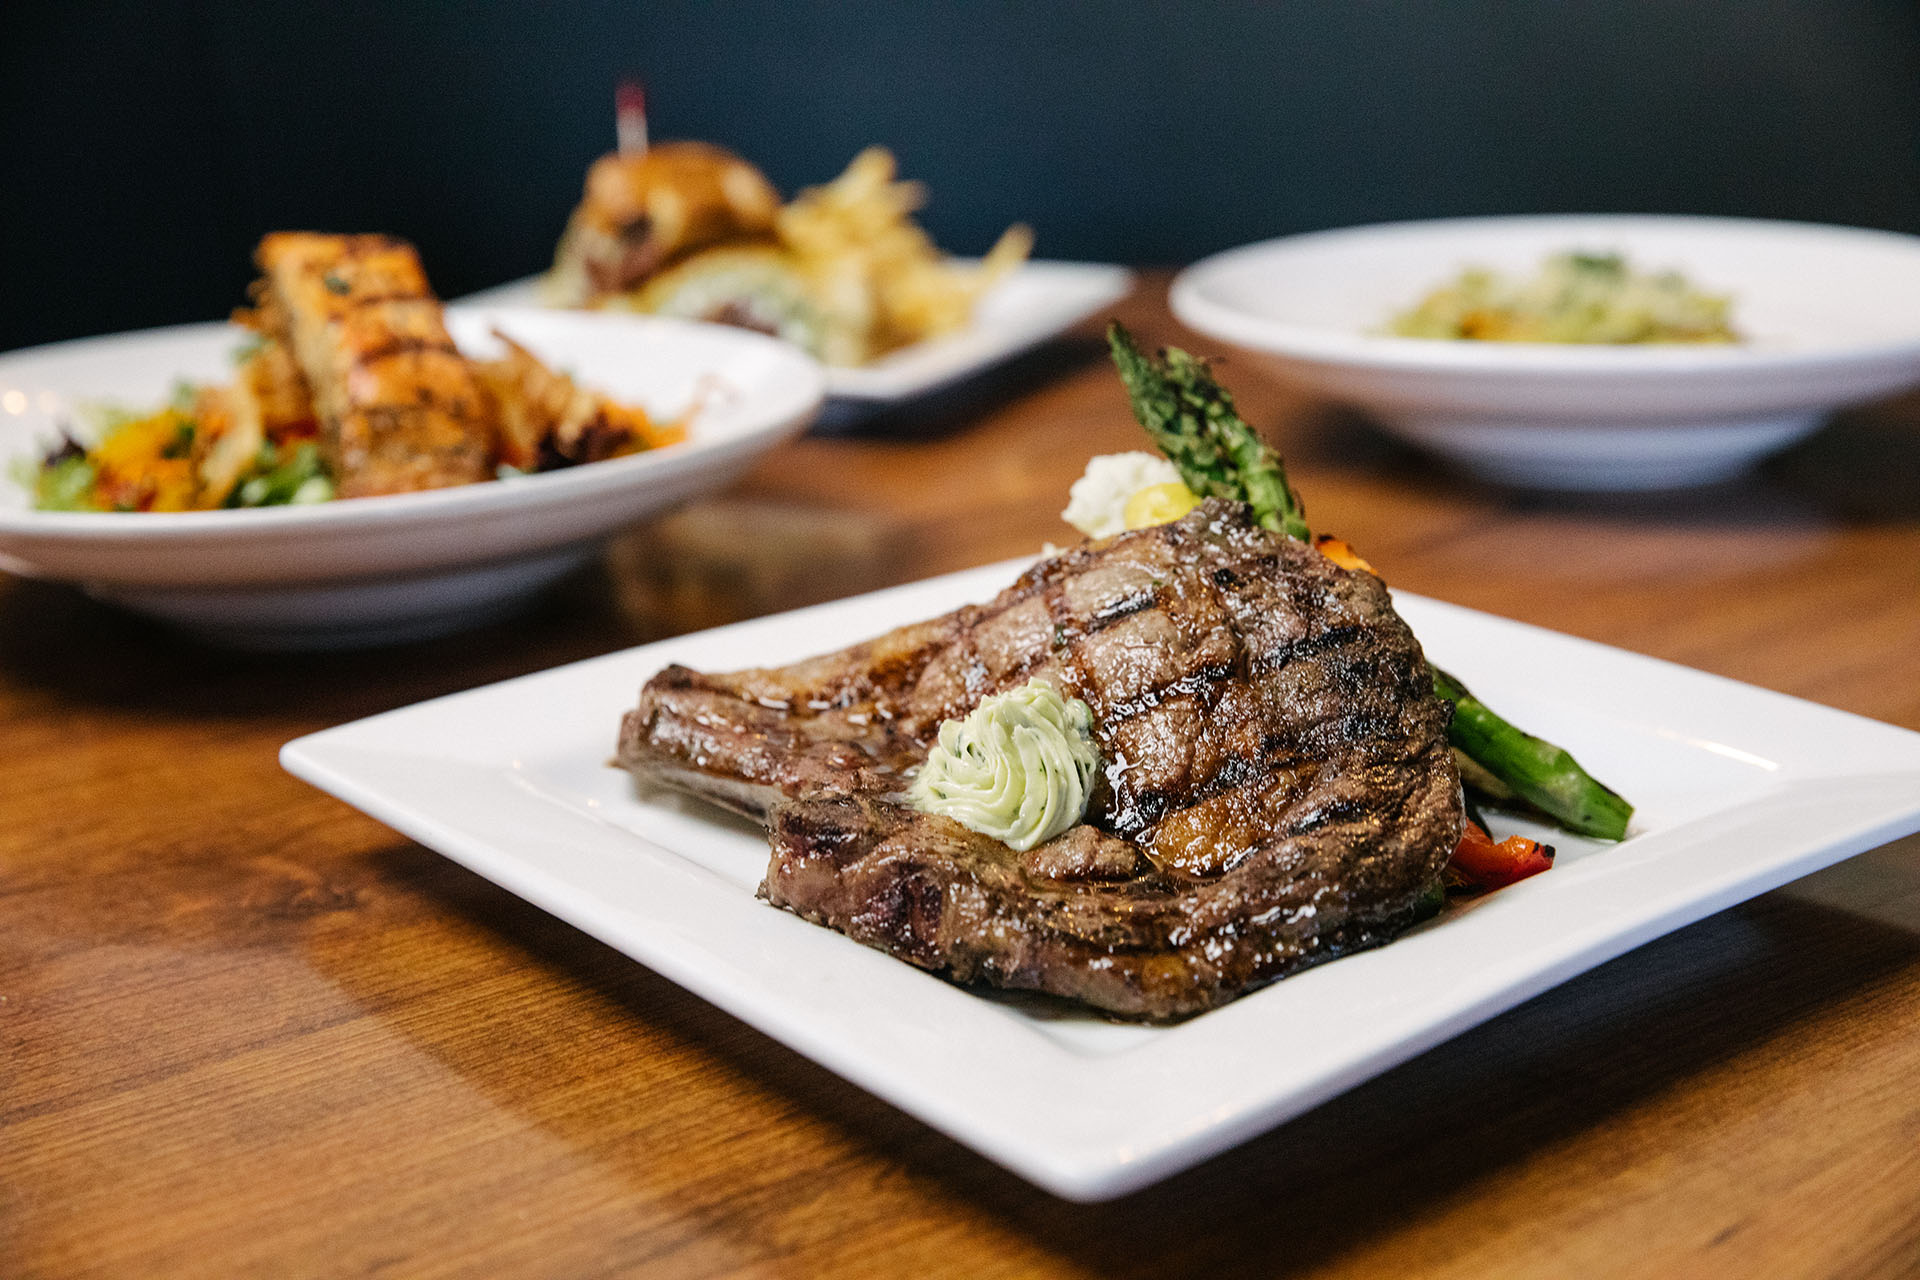 Pictured: our delicious flat iron steak entree with Chimichurri, Fried Spring Onion, Shallot, Mashed Potatoes, and Charred Vegetables. The steak is perfectly browned and glistening and takes up almost the entire plate. Visit Piazza del Pane for Fresno's best Italian dining and more.